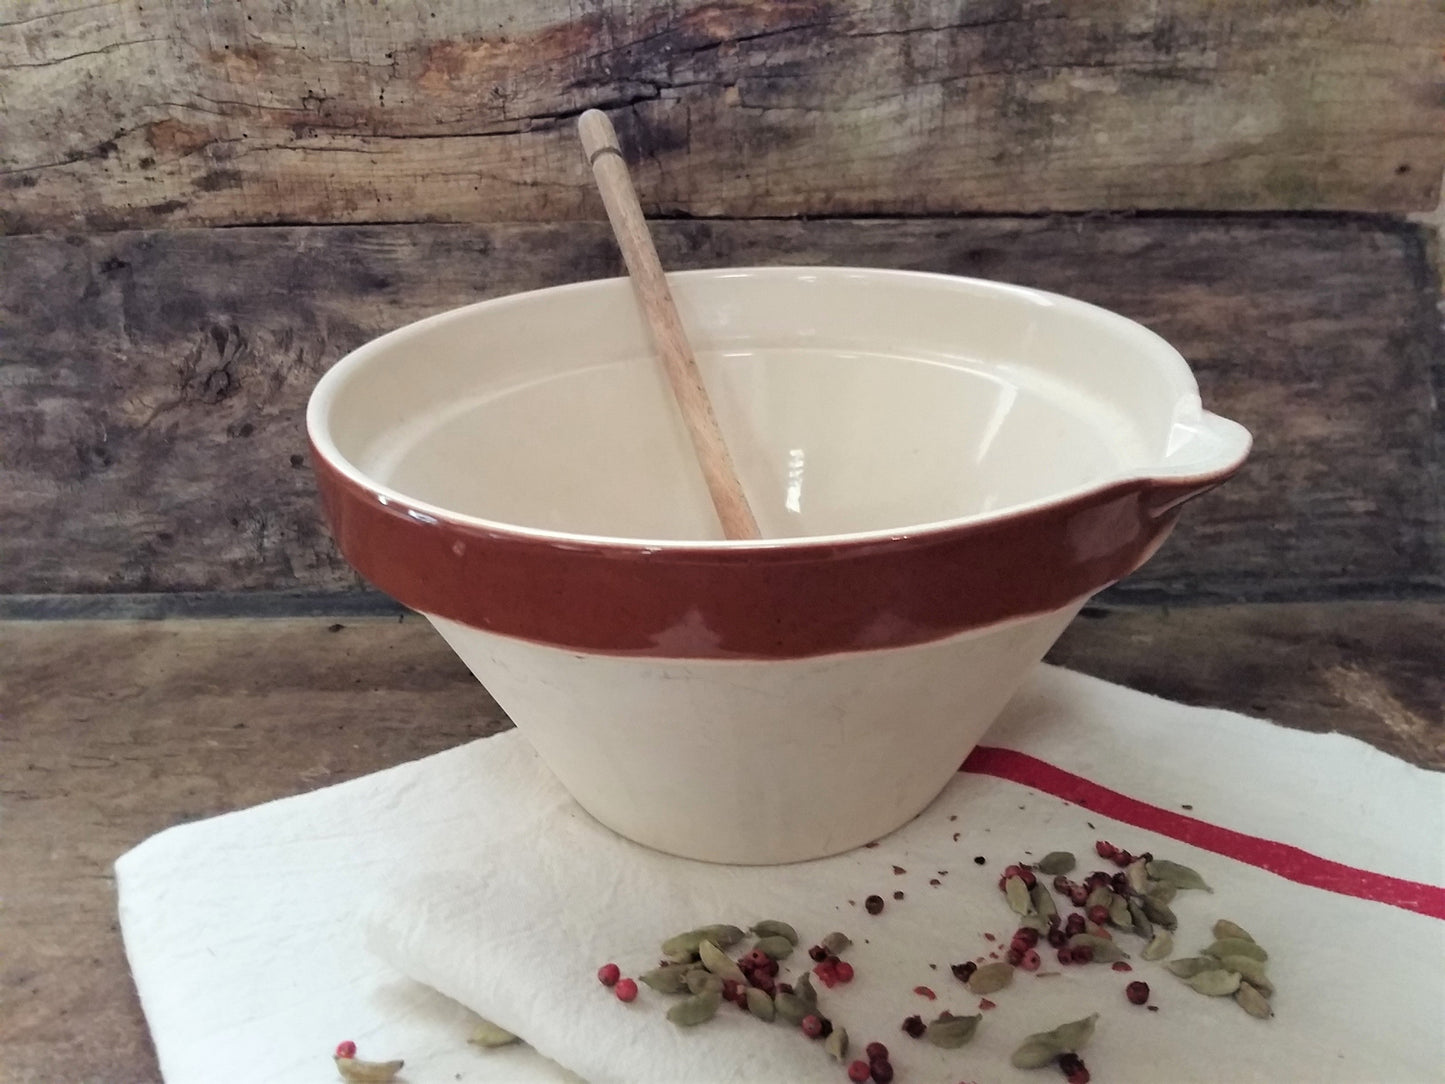 Huge, 10 Inch, Mixing Bowl. Two-Tone, Part Glazed, French Confit Basin. from Tiggy and Pip - €110.00! Shop now at Tiggy and Pip